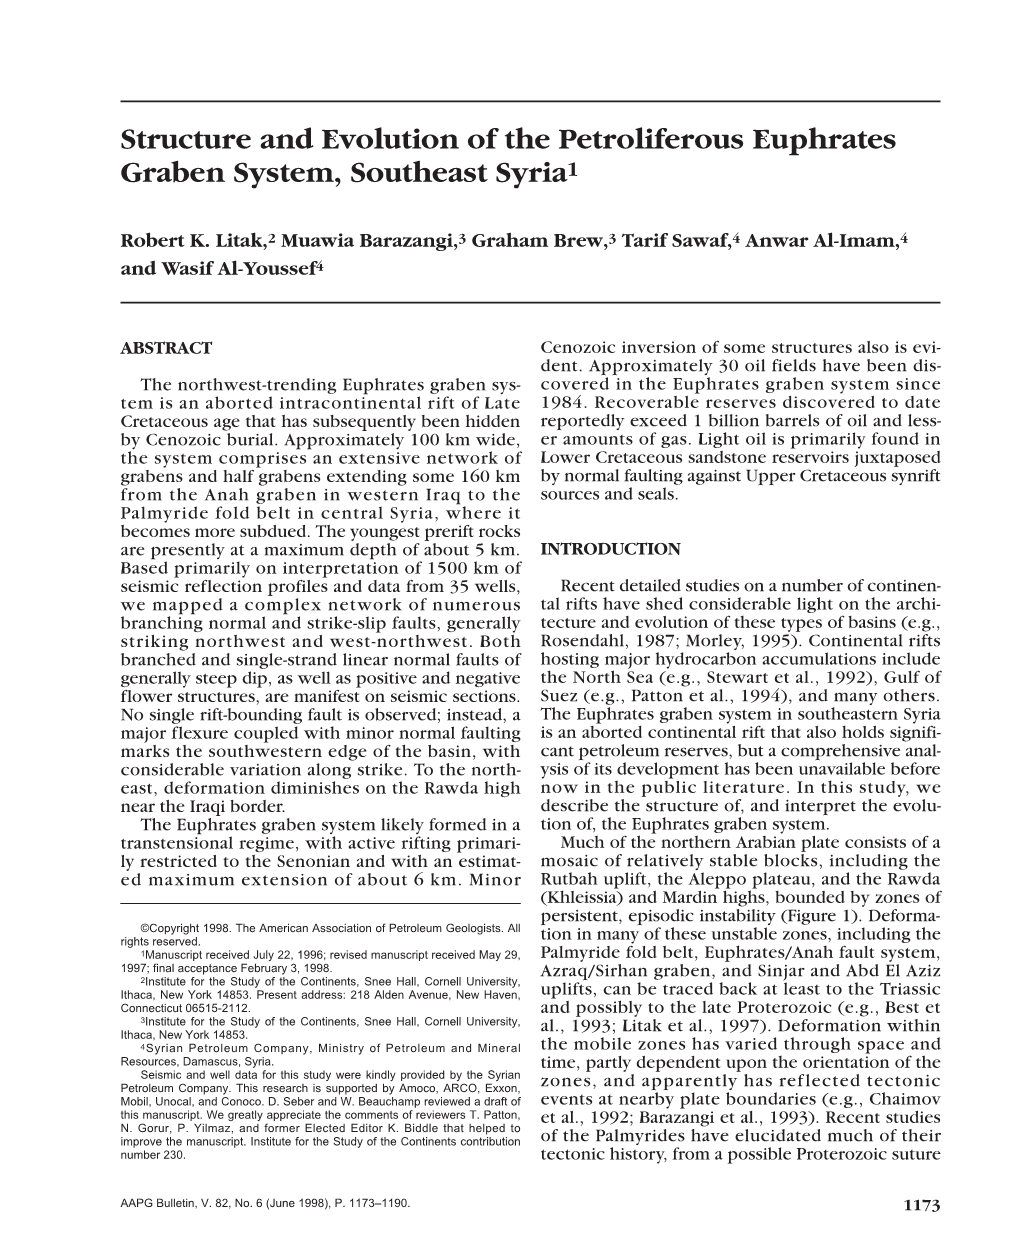 Structure and Evolution of the Petroliferous Euphrates Graben System, Southeast Syria1